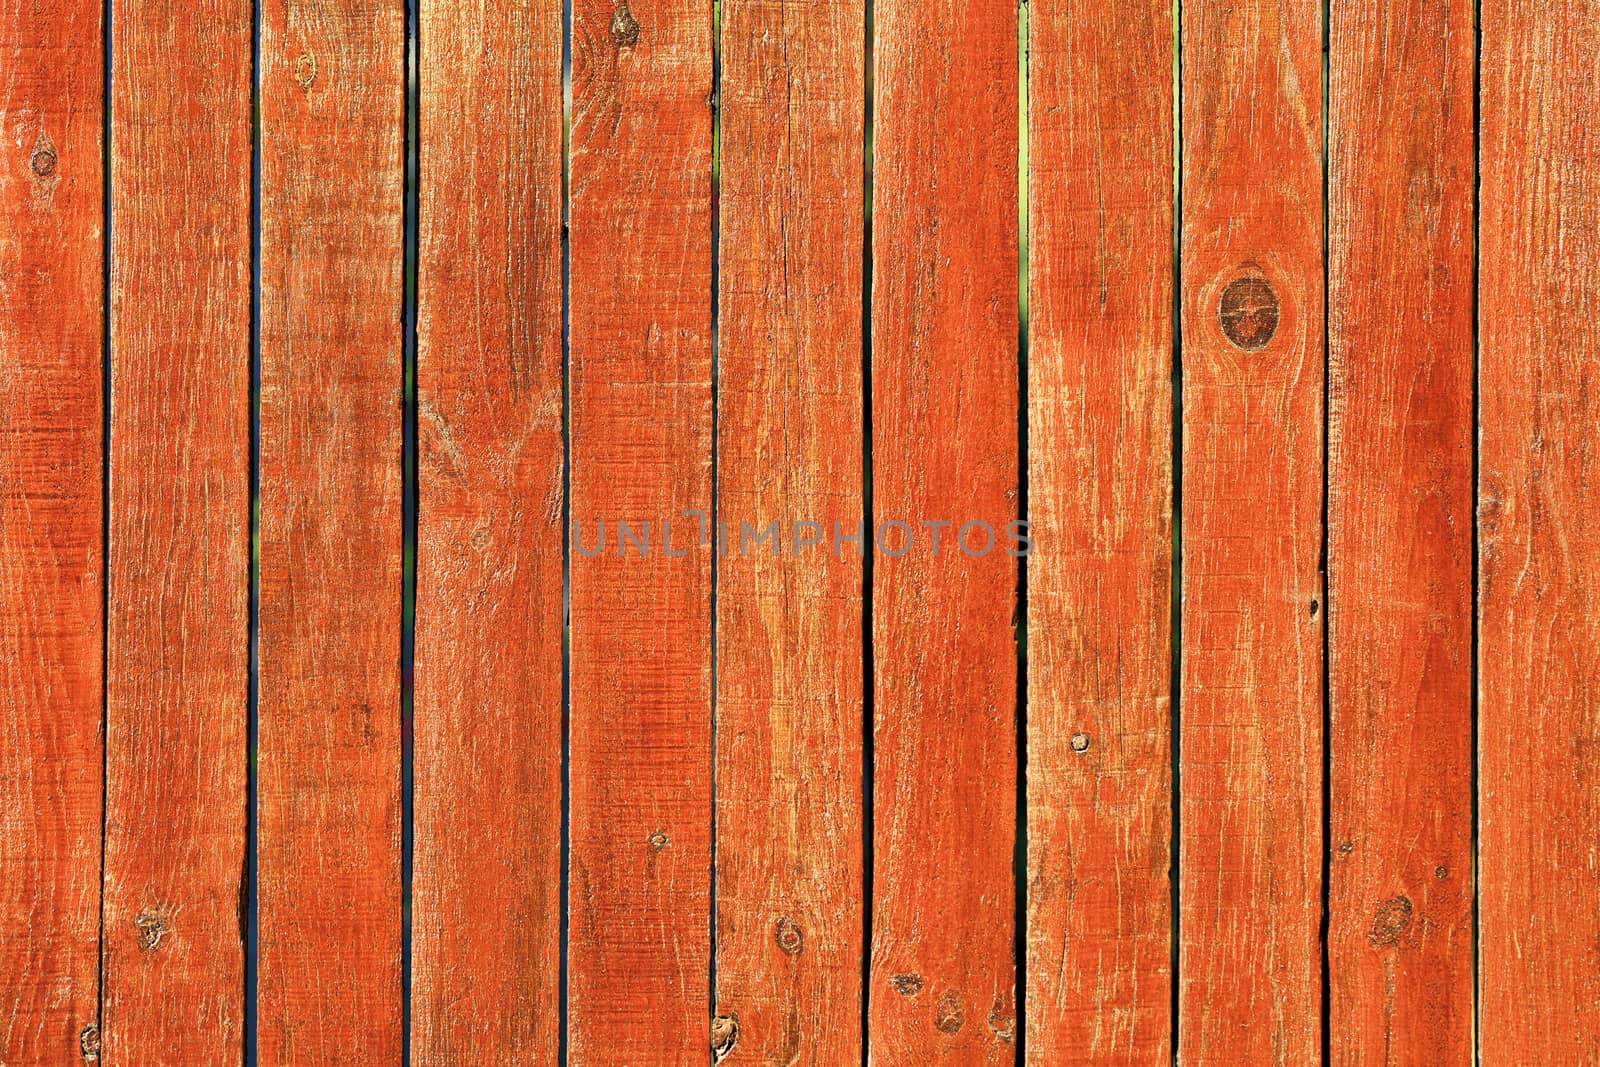 Shabby orange paint on an old wooden fence and wood texture.